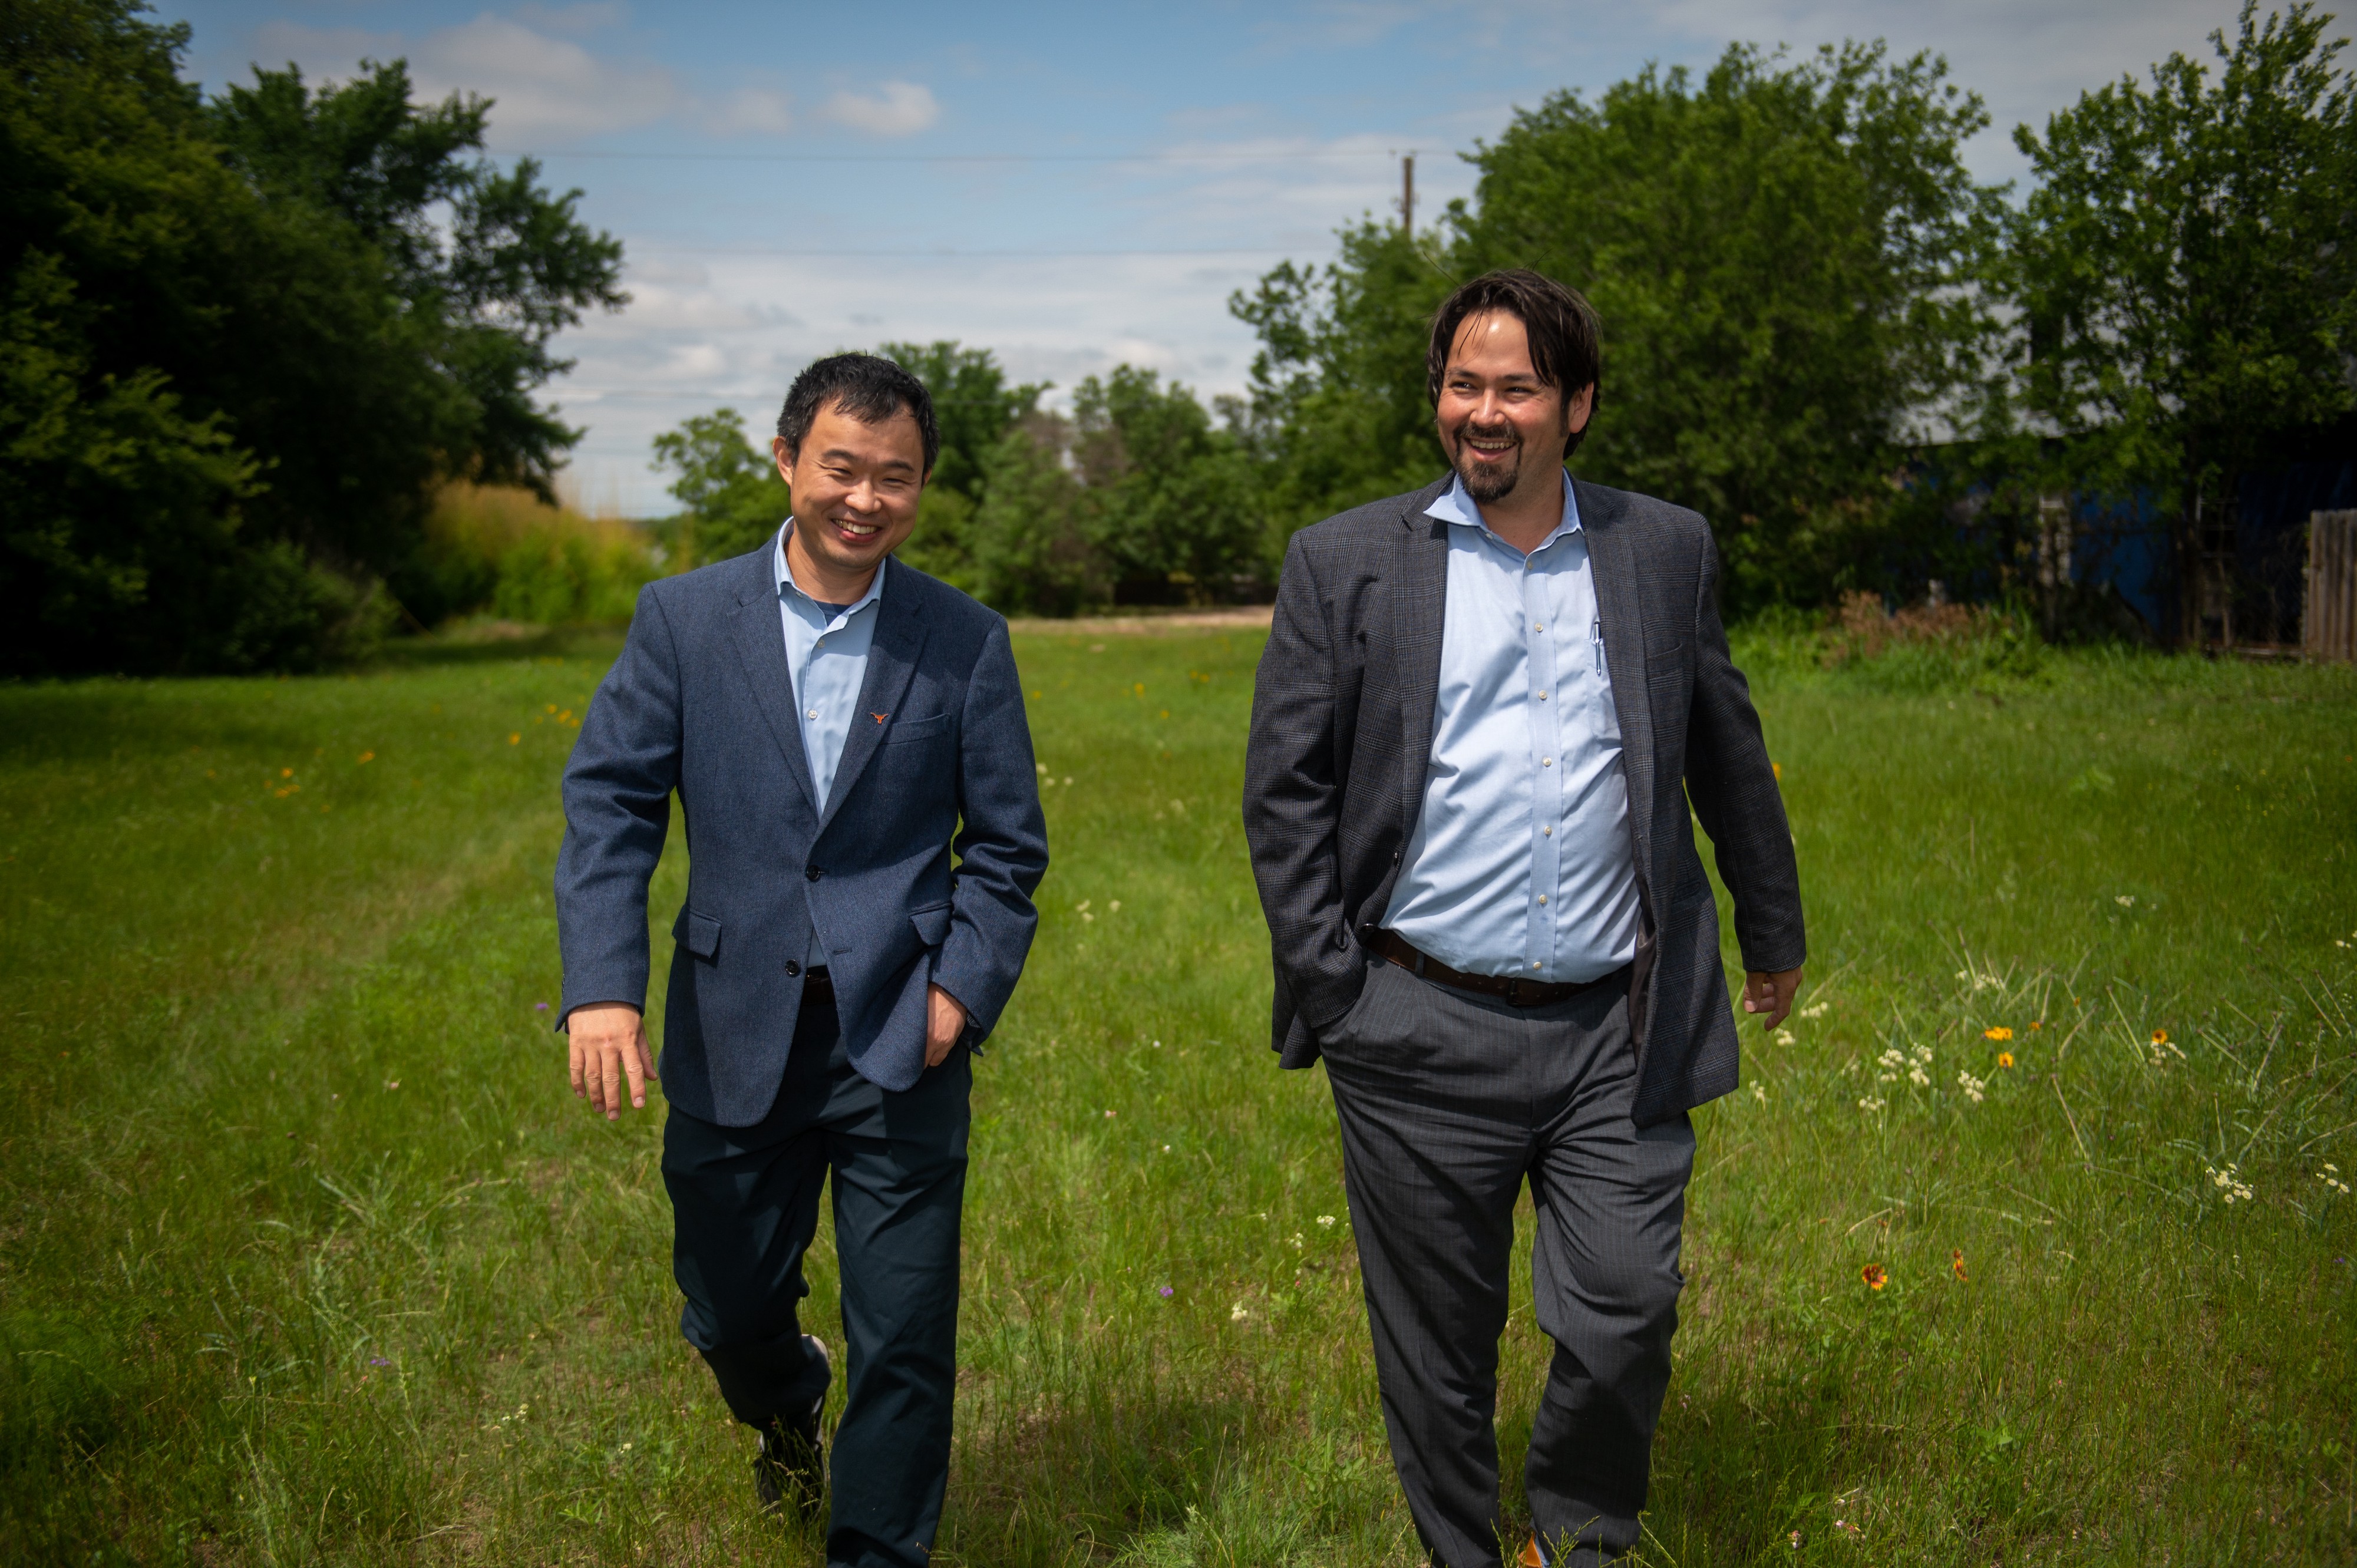 Two men, one a professor and another who works in transportation, walk through a grassy field where they plan to build a mobility hub.